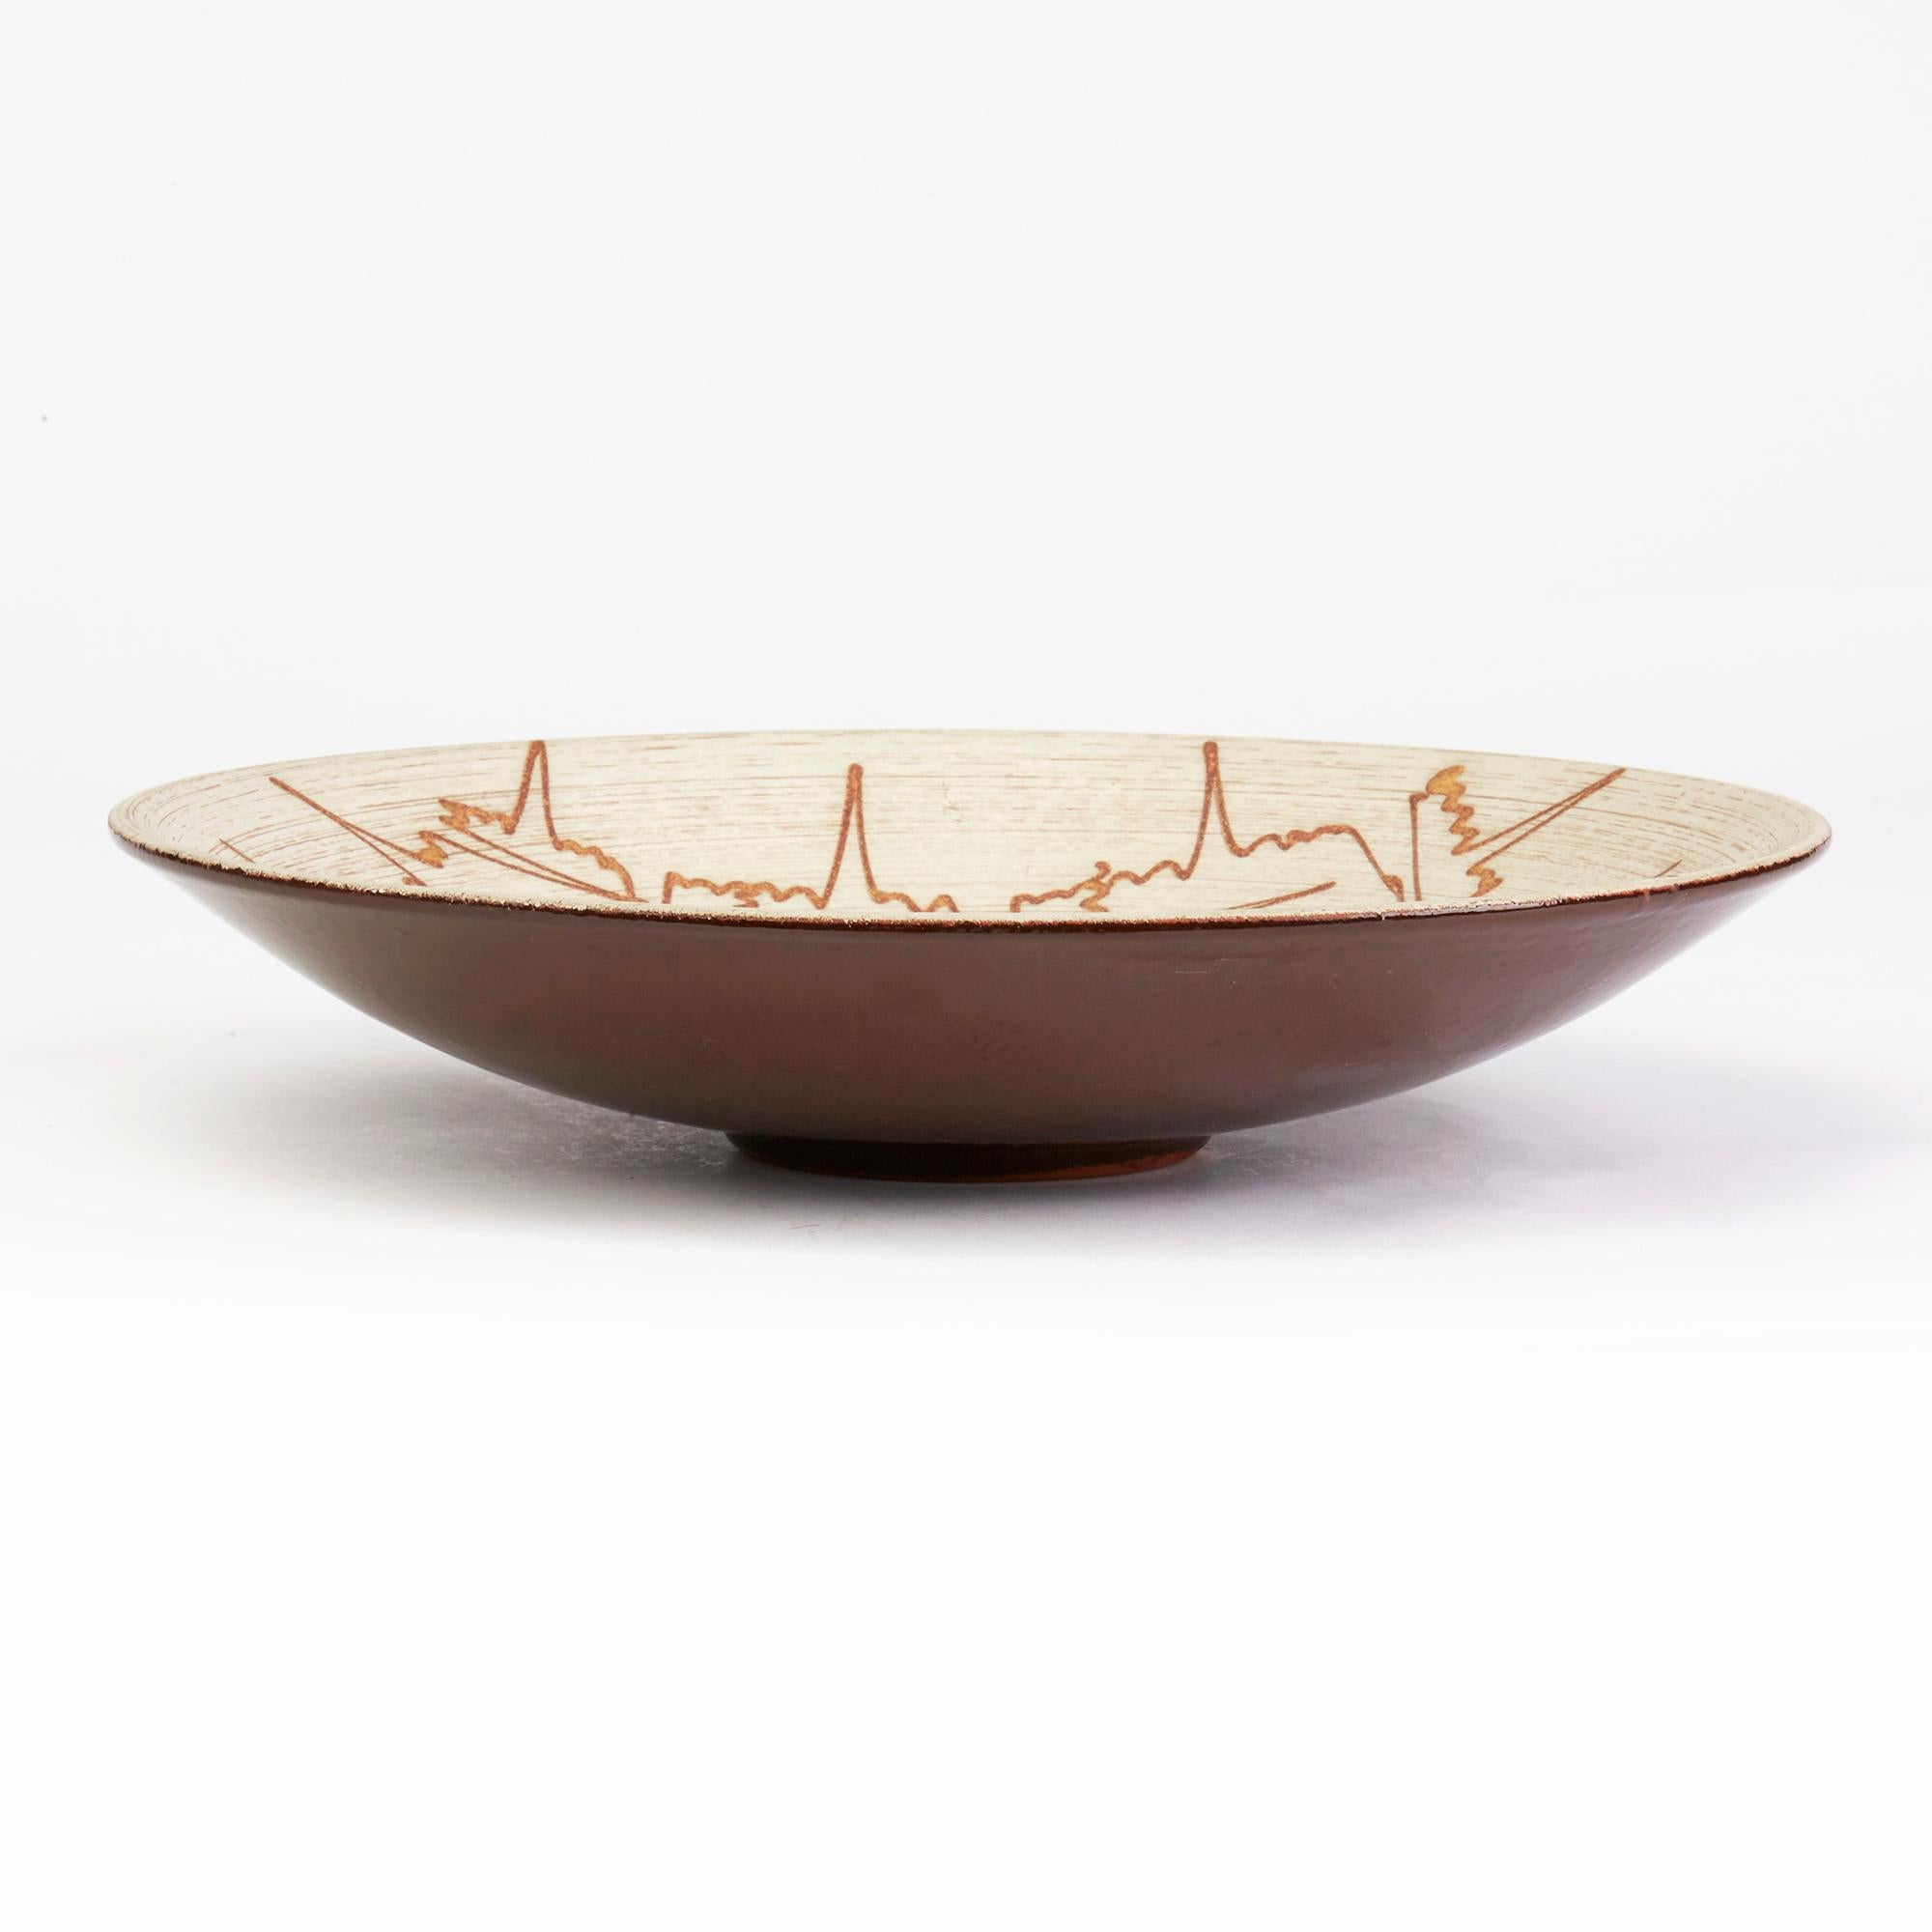 Ceramic Carstens Tönnieshof West German Midcentury Abstract Trailed Design Bowl For Sale